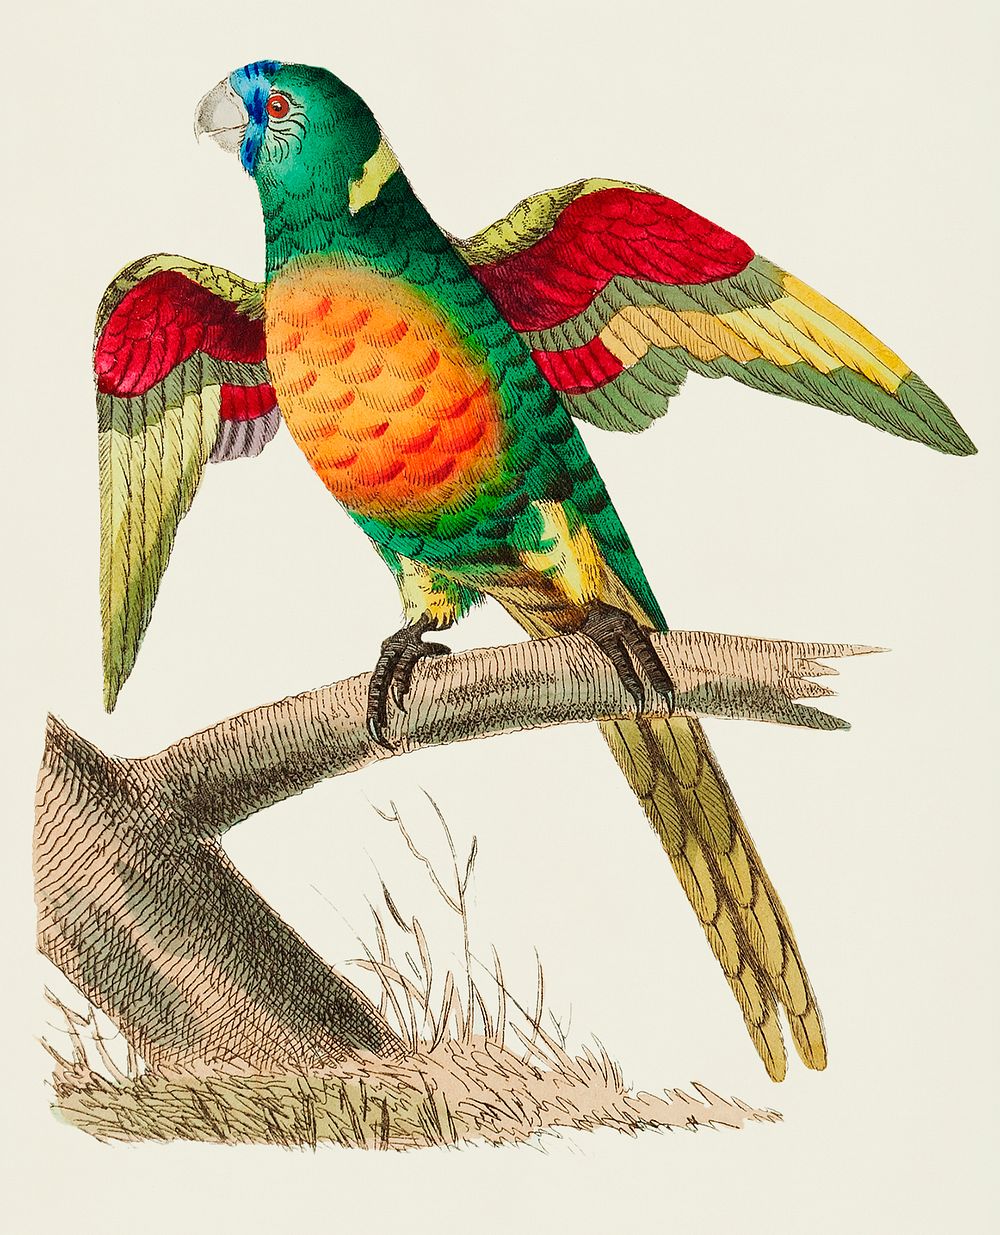 Red-breasted Parrakeet or Long-tailed Green Parrot illustration from The Naturalist's Miscellany (1789-1813) by George Shaw…